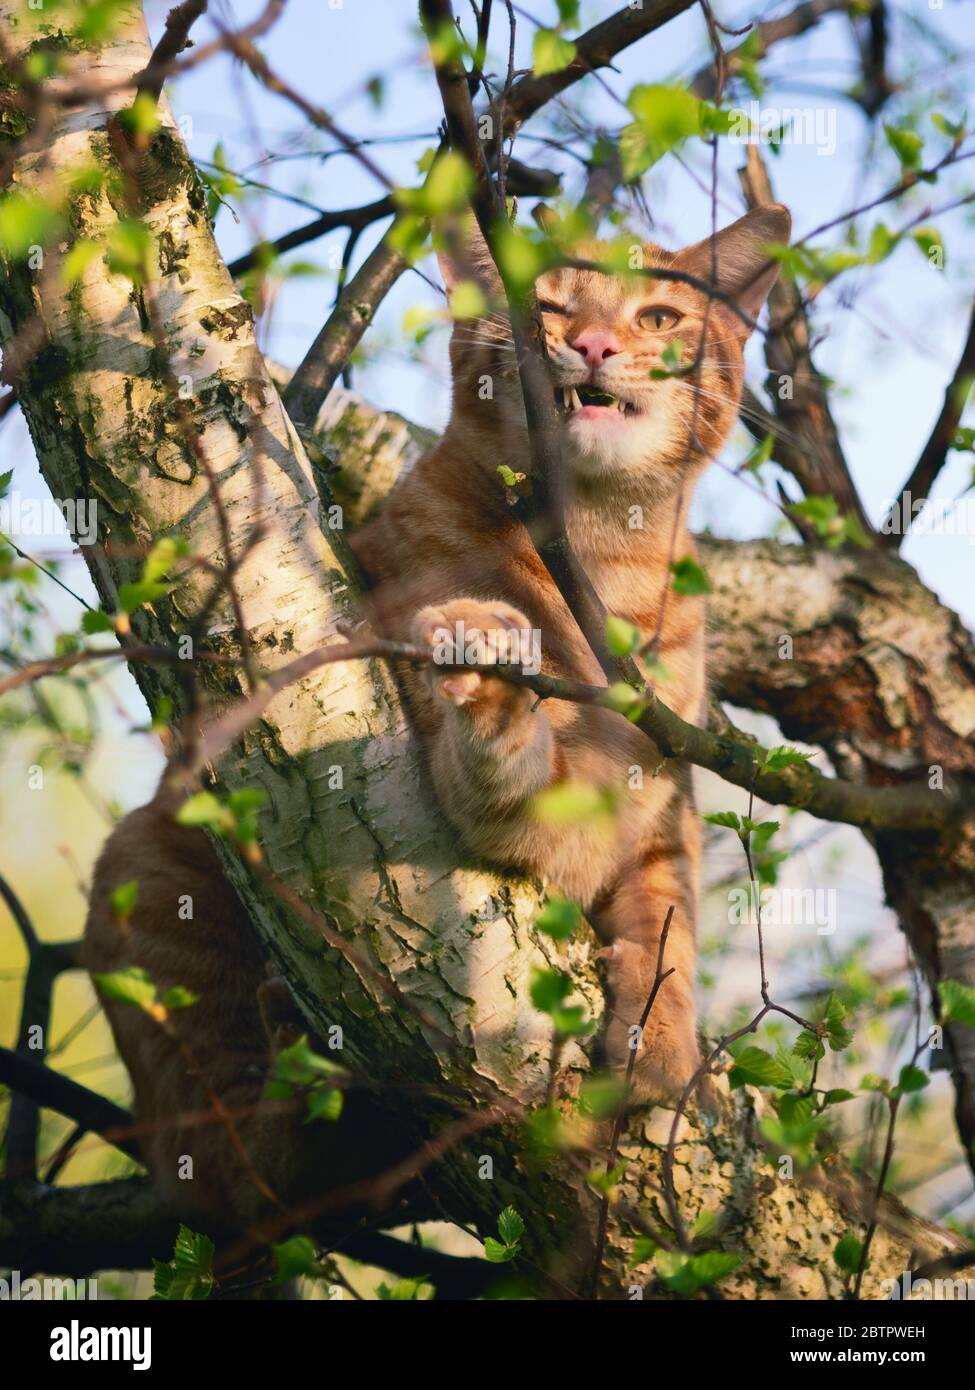 Red cat sitting on a tree with young spring foliage and nibbles branches Stock Photo